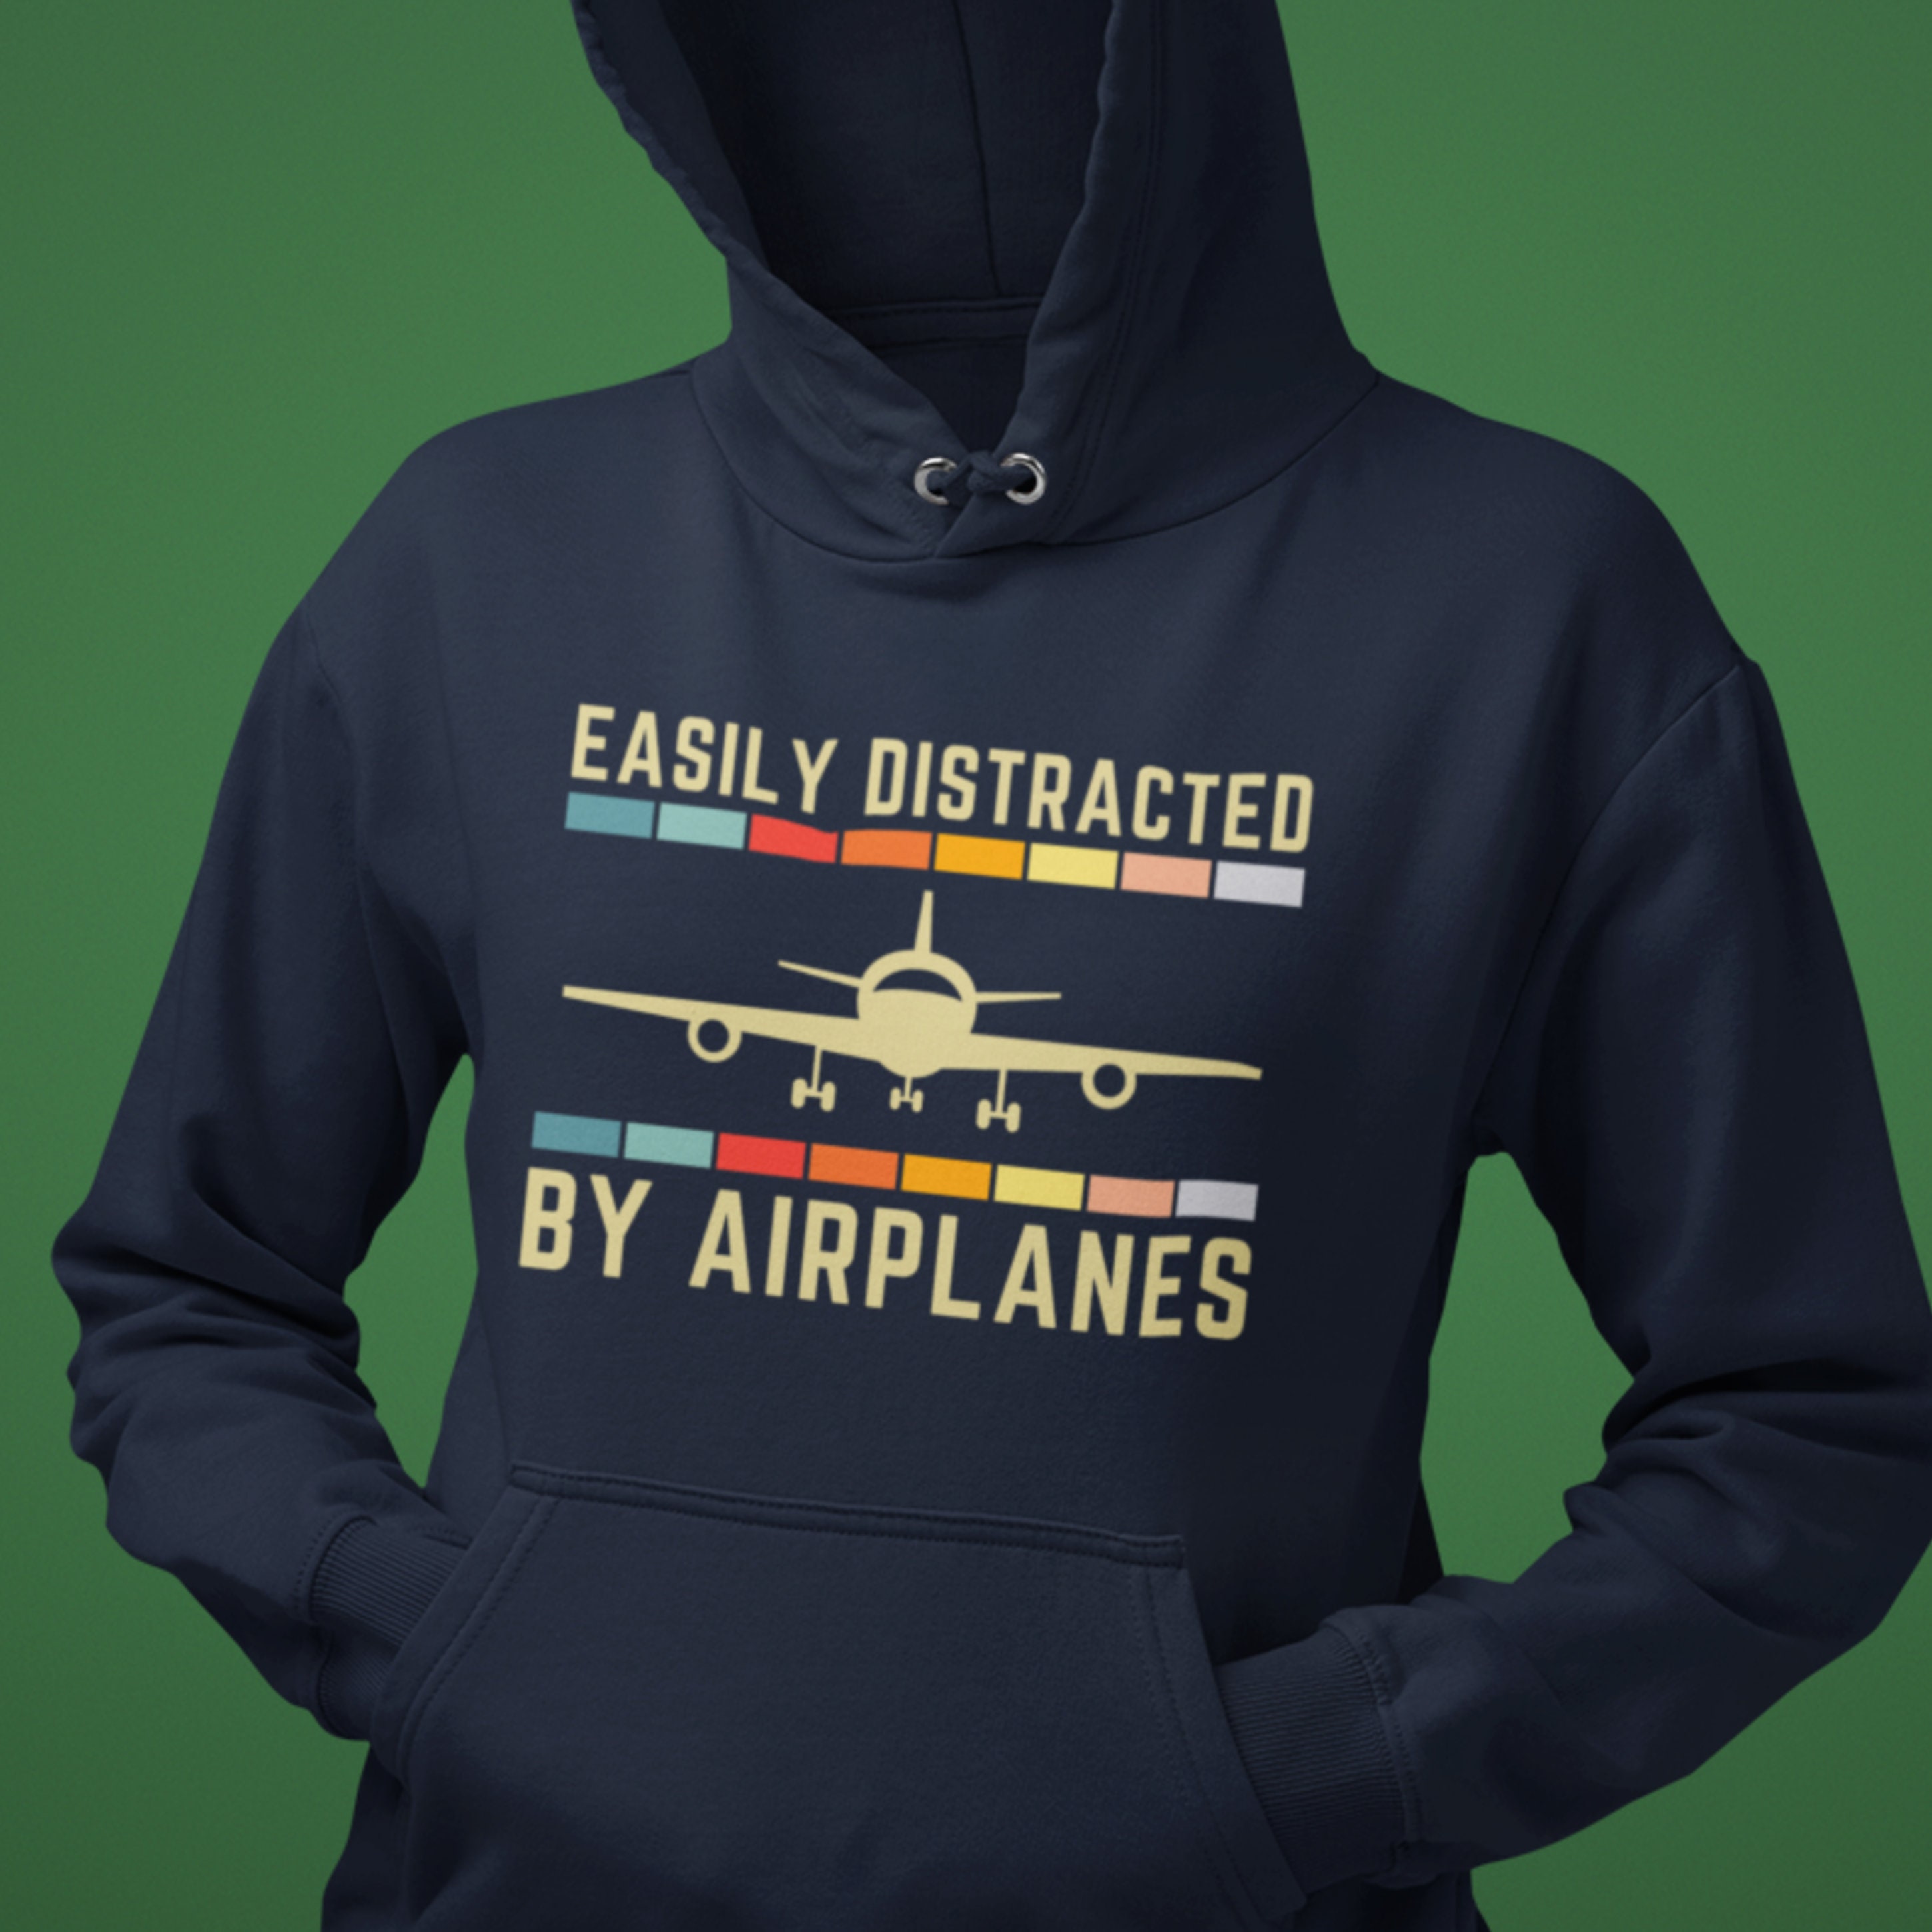  Plane Aircraft Airplane Jet Hoodies for Men Full Zip Up  Sweater Hooded Sweatshirt Tops Jackets Outwear S : Sports & Outdoors